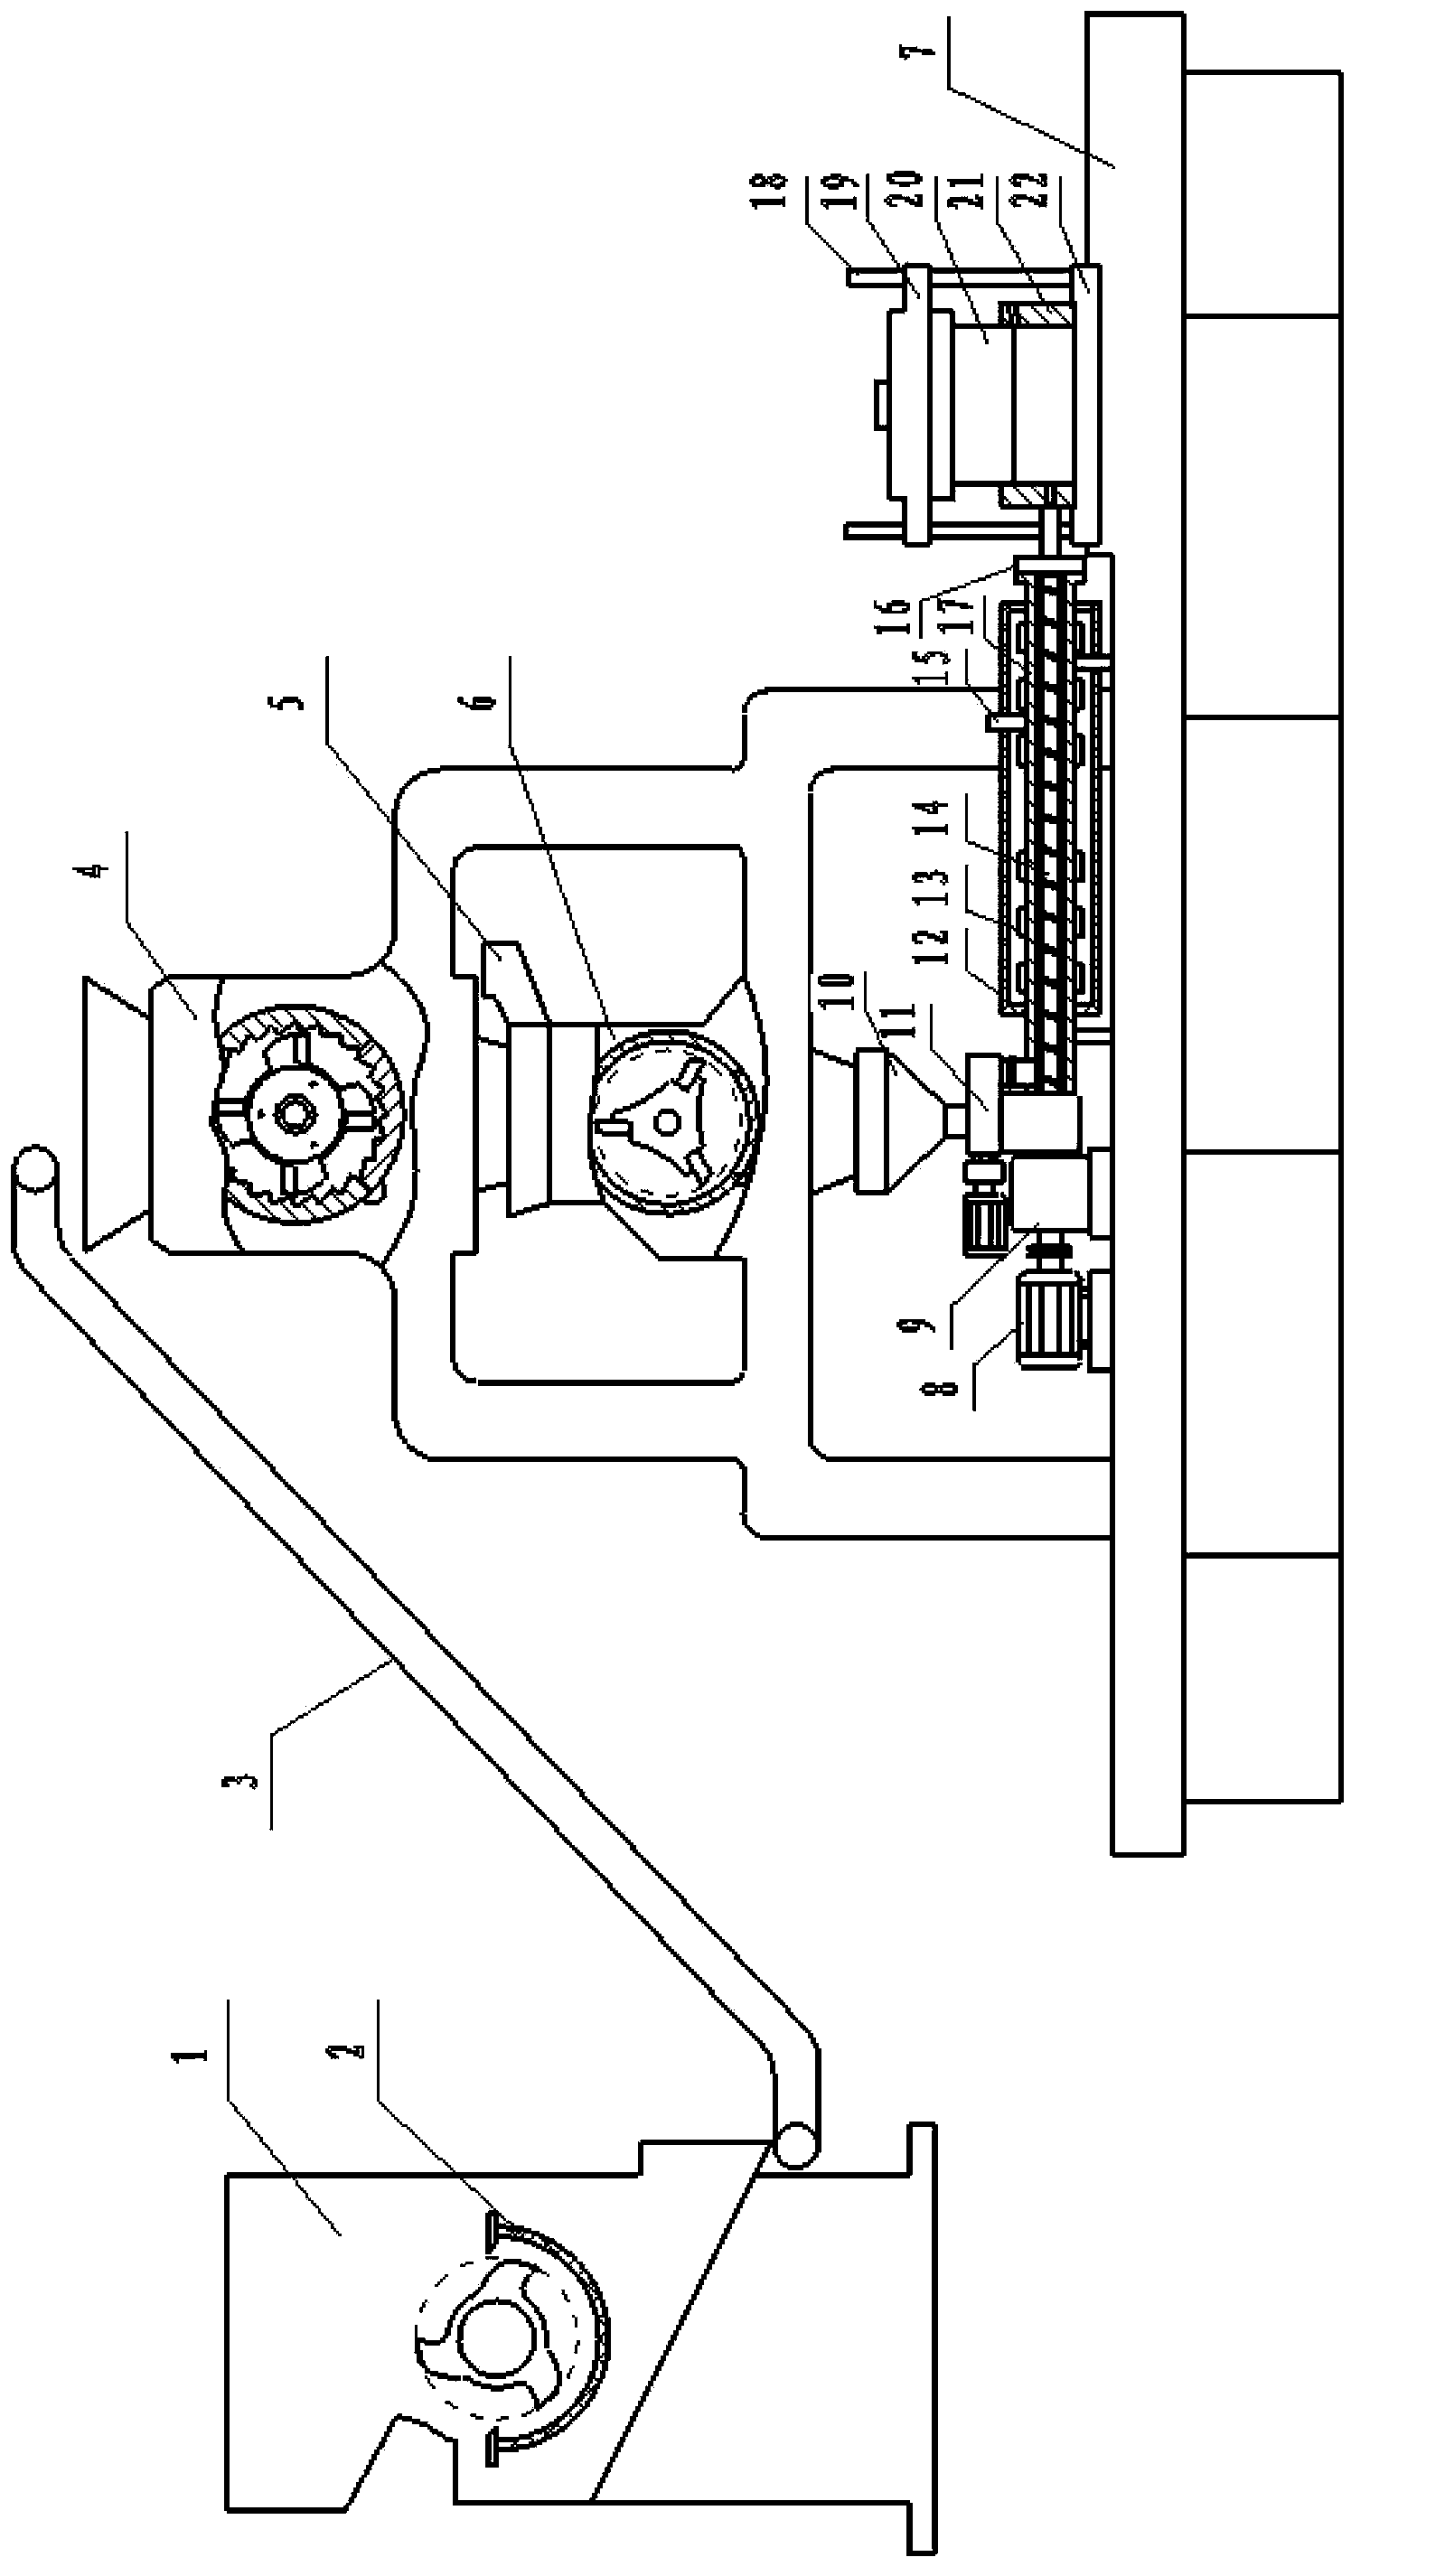 Device for regenerating waste and old thermosetting plastics, and technology thereof